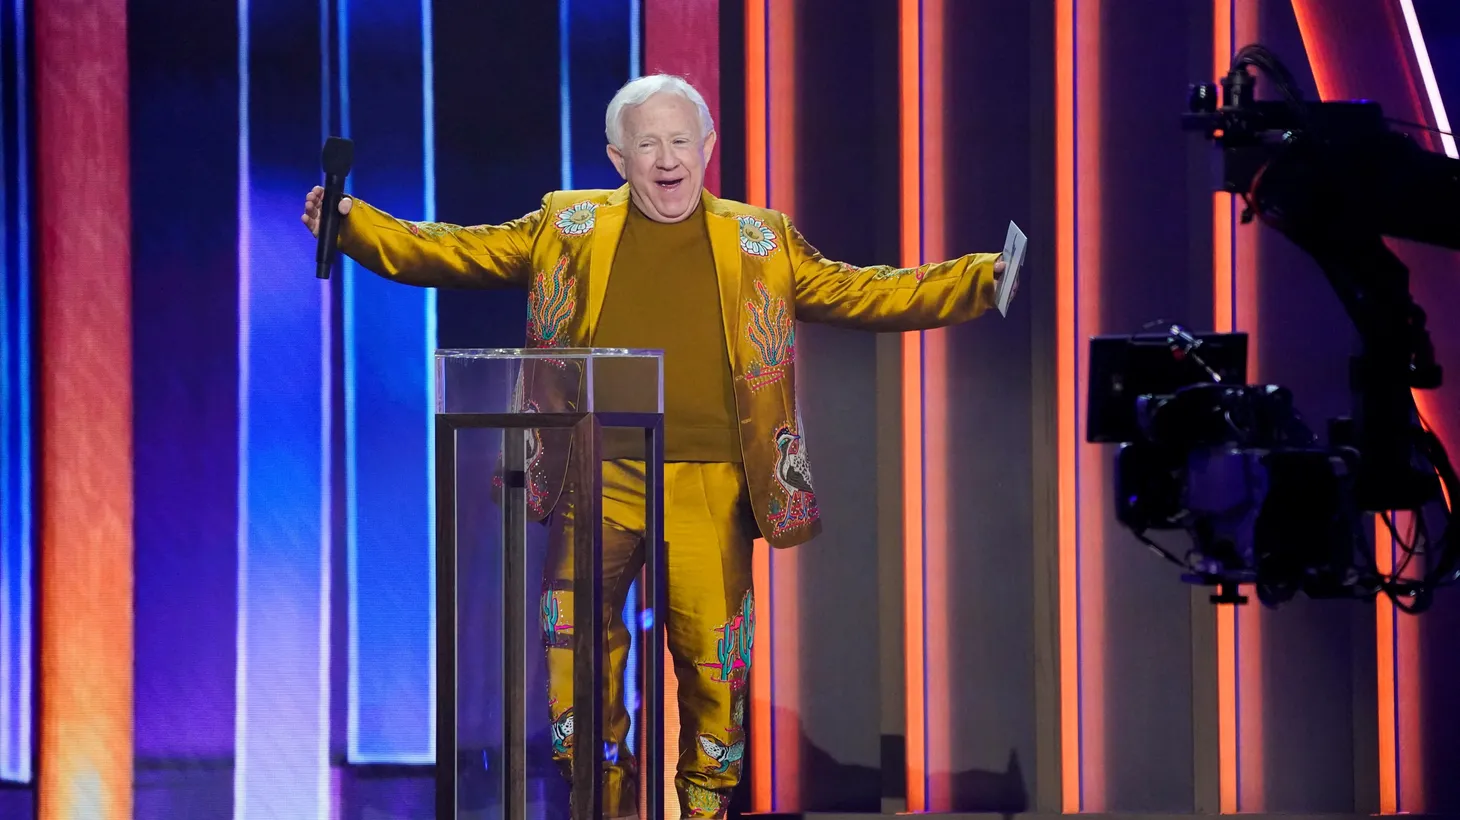 Leslie Jordan announces the winner of Duo Of The Year Dan + Shay at the 56th Academy of Country Music Awards (ACM) at the Grand Ole Opry in Nashville, Tennessee, U.S. April 18, 2021.